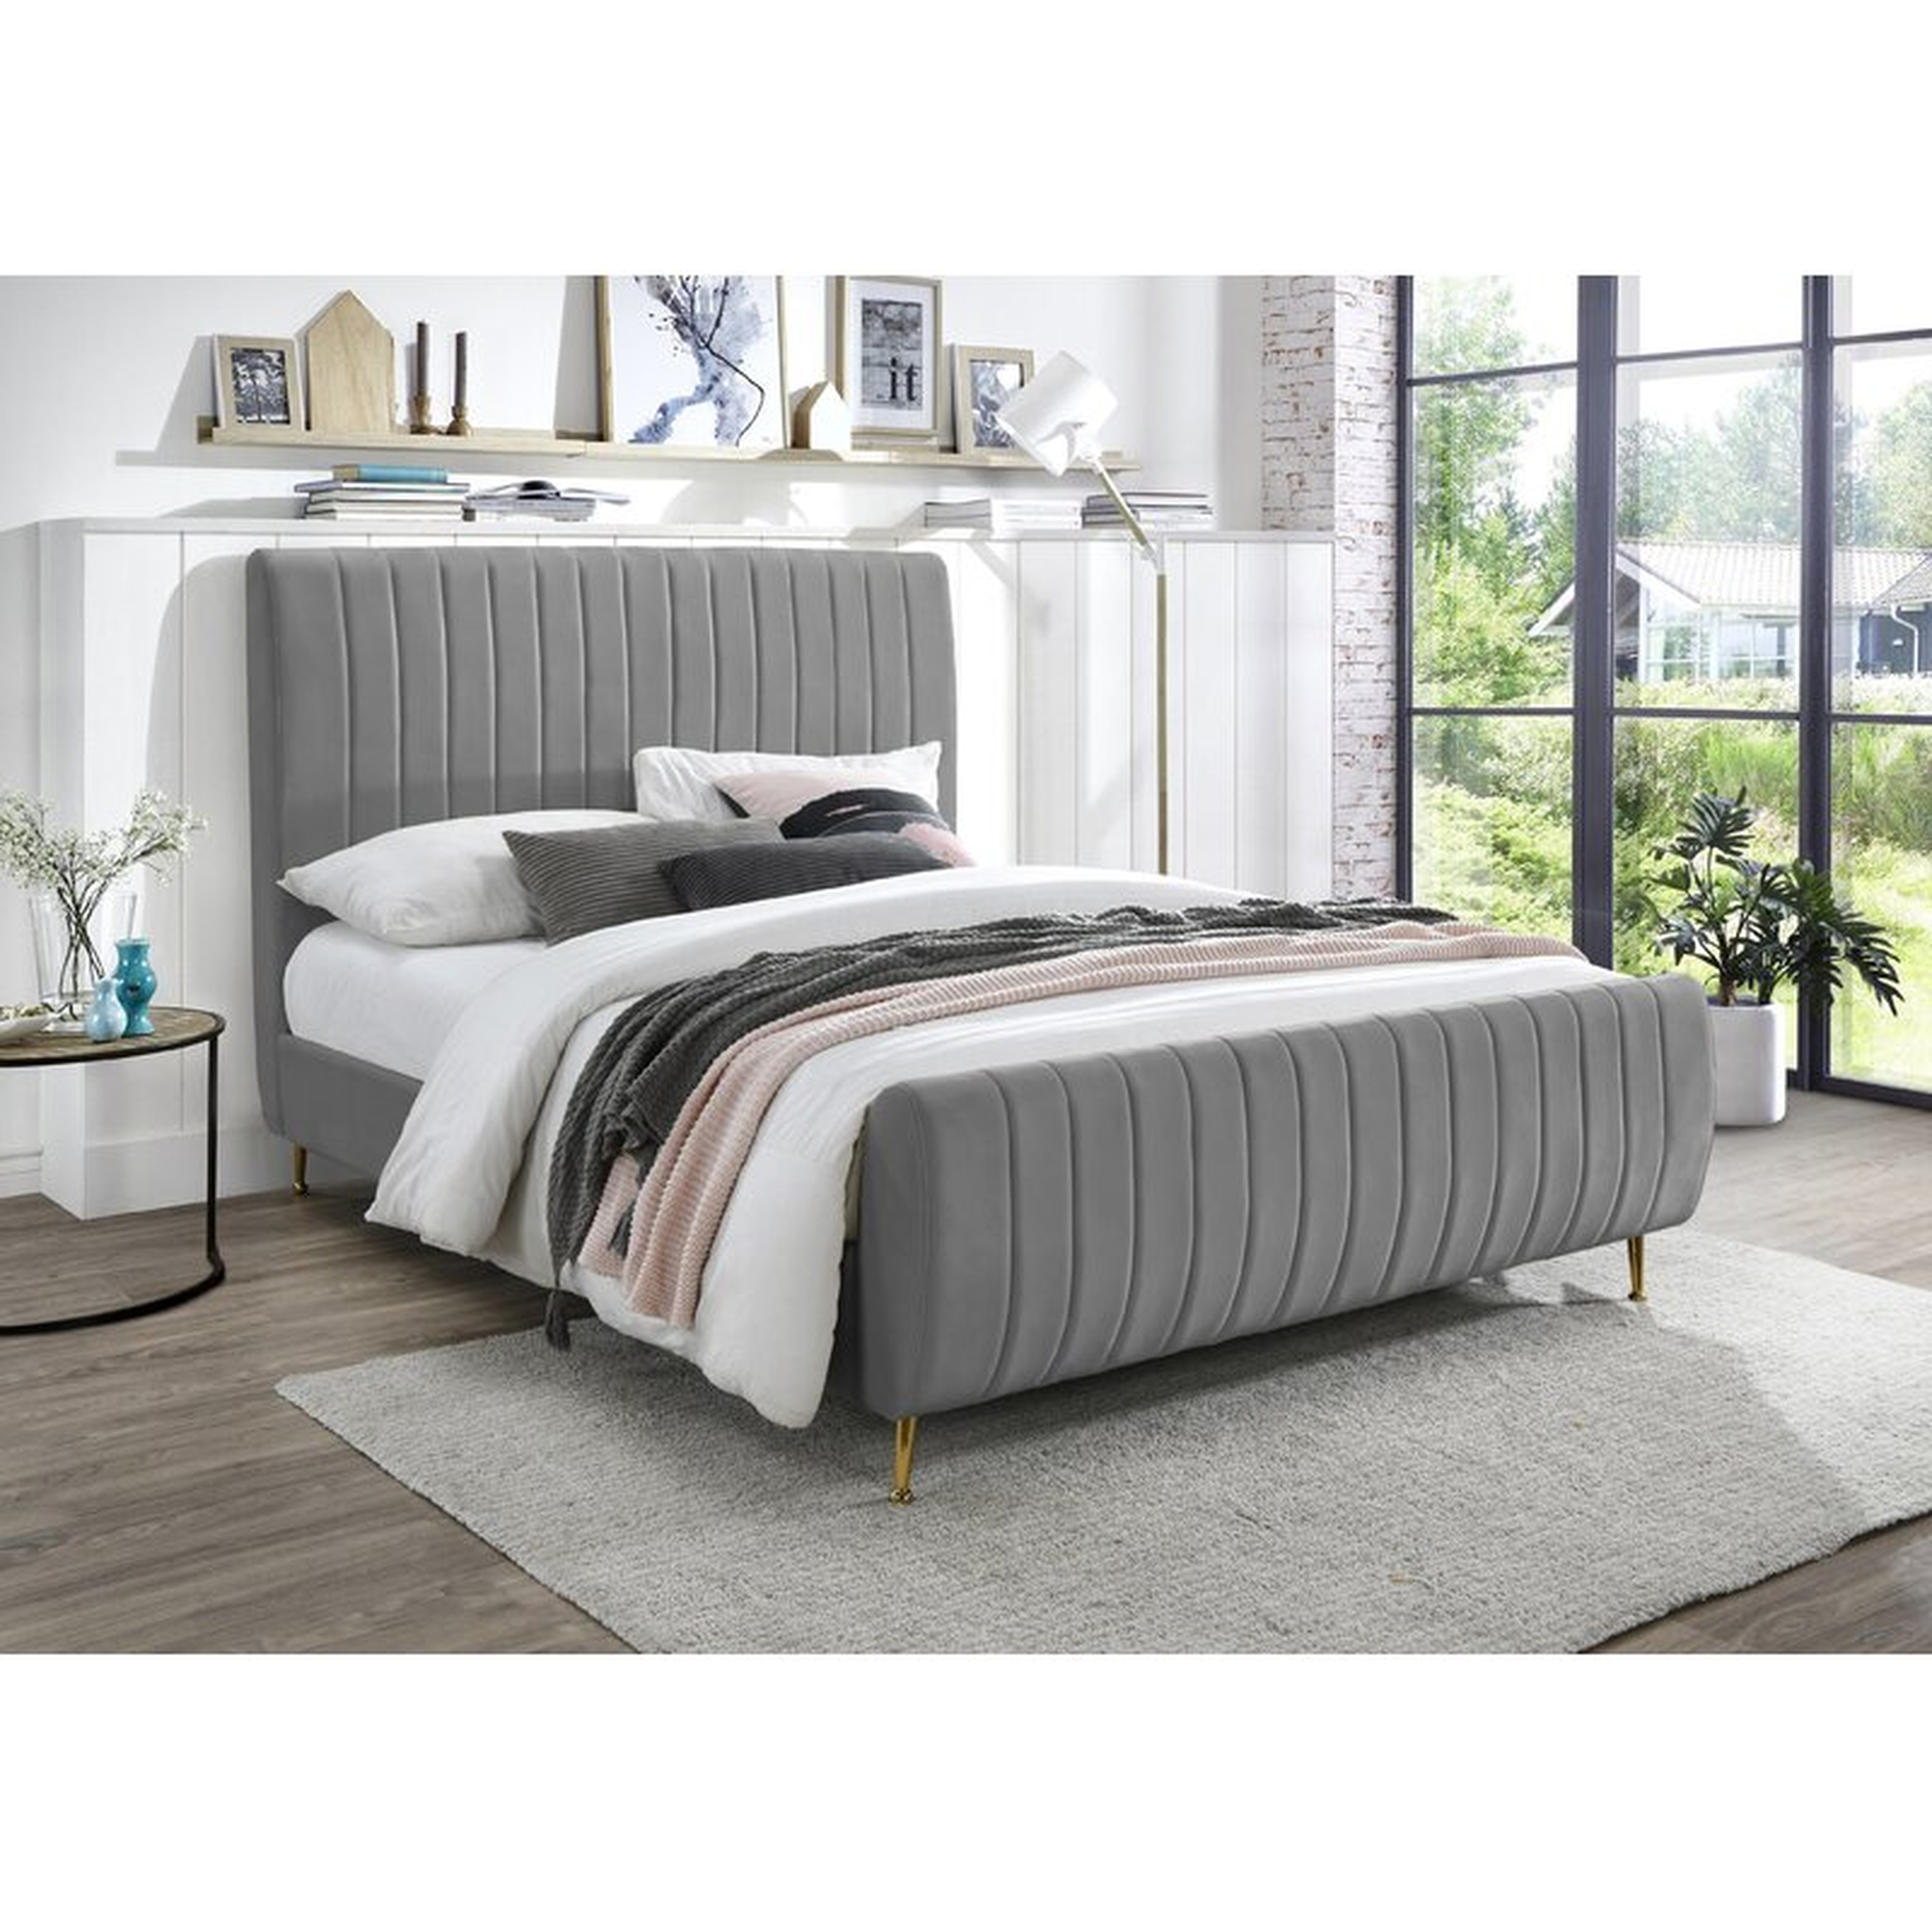 Summersville Tufted Upholstered Low Profile Platform Bed  Summersville Tufted Upholstered Low Profile Platform Bed  Summersville Tufted Upholstered Low Profile Platform Bed  Summersville Tufted Upholstered Low Profile Platform Bed  Summersville Tufted Uph - Wayfair